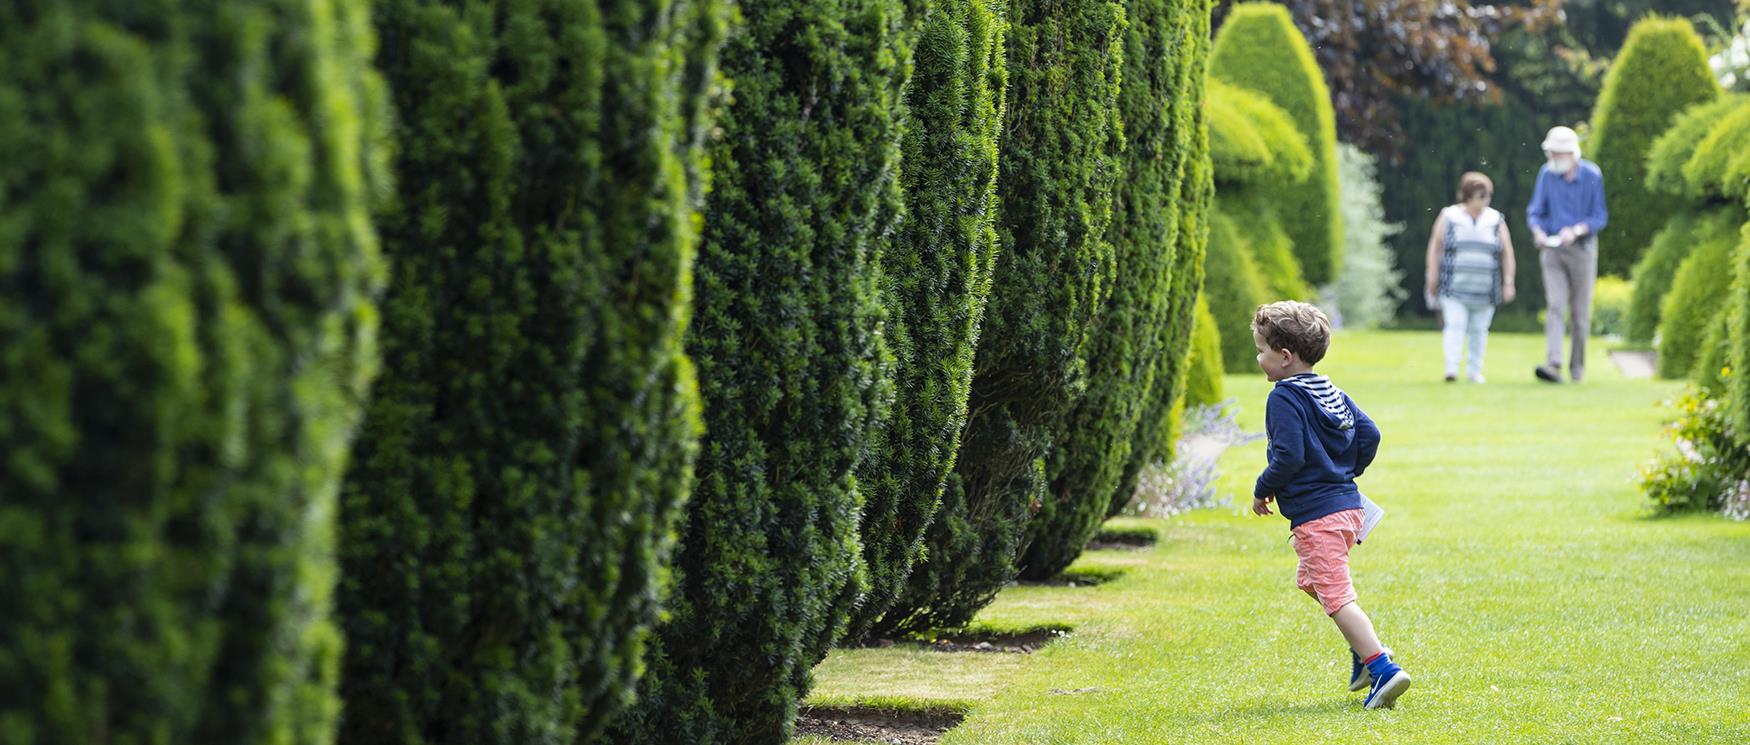 50 things to do this summer - child running through trees at Hinton Ampner, Hampshire